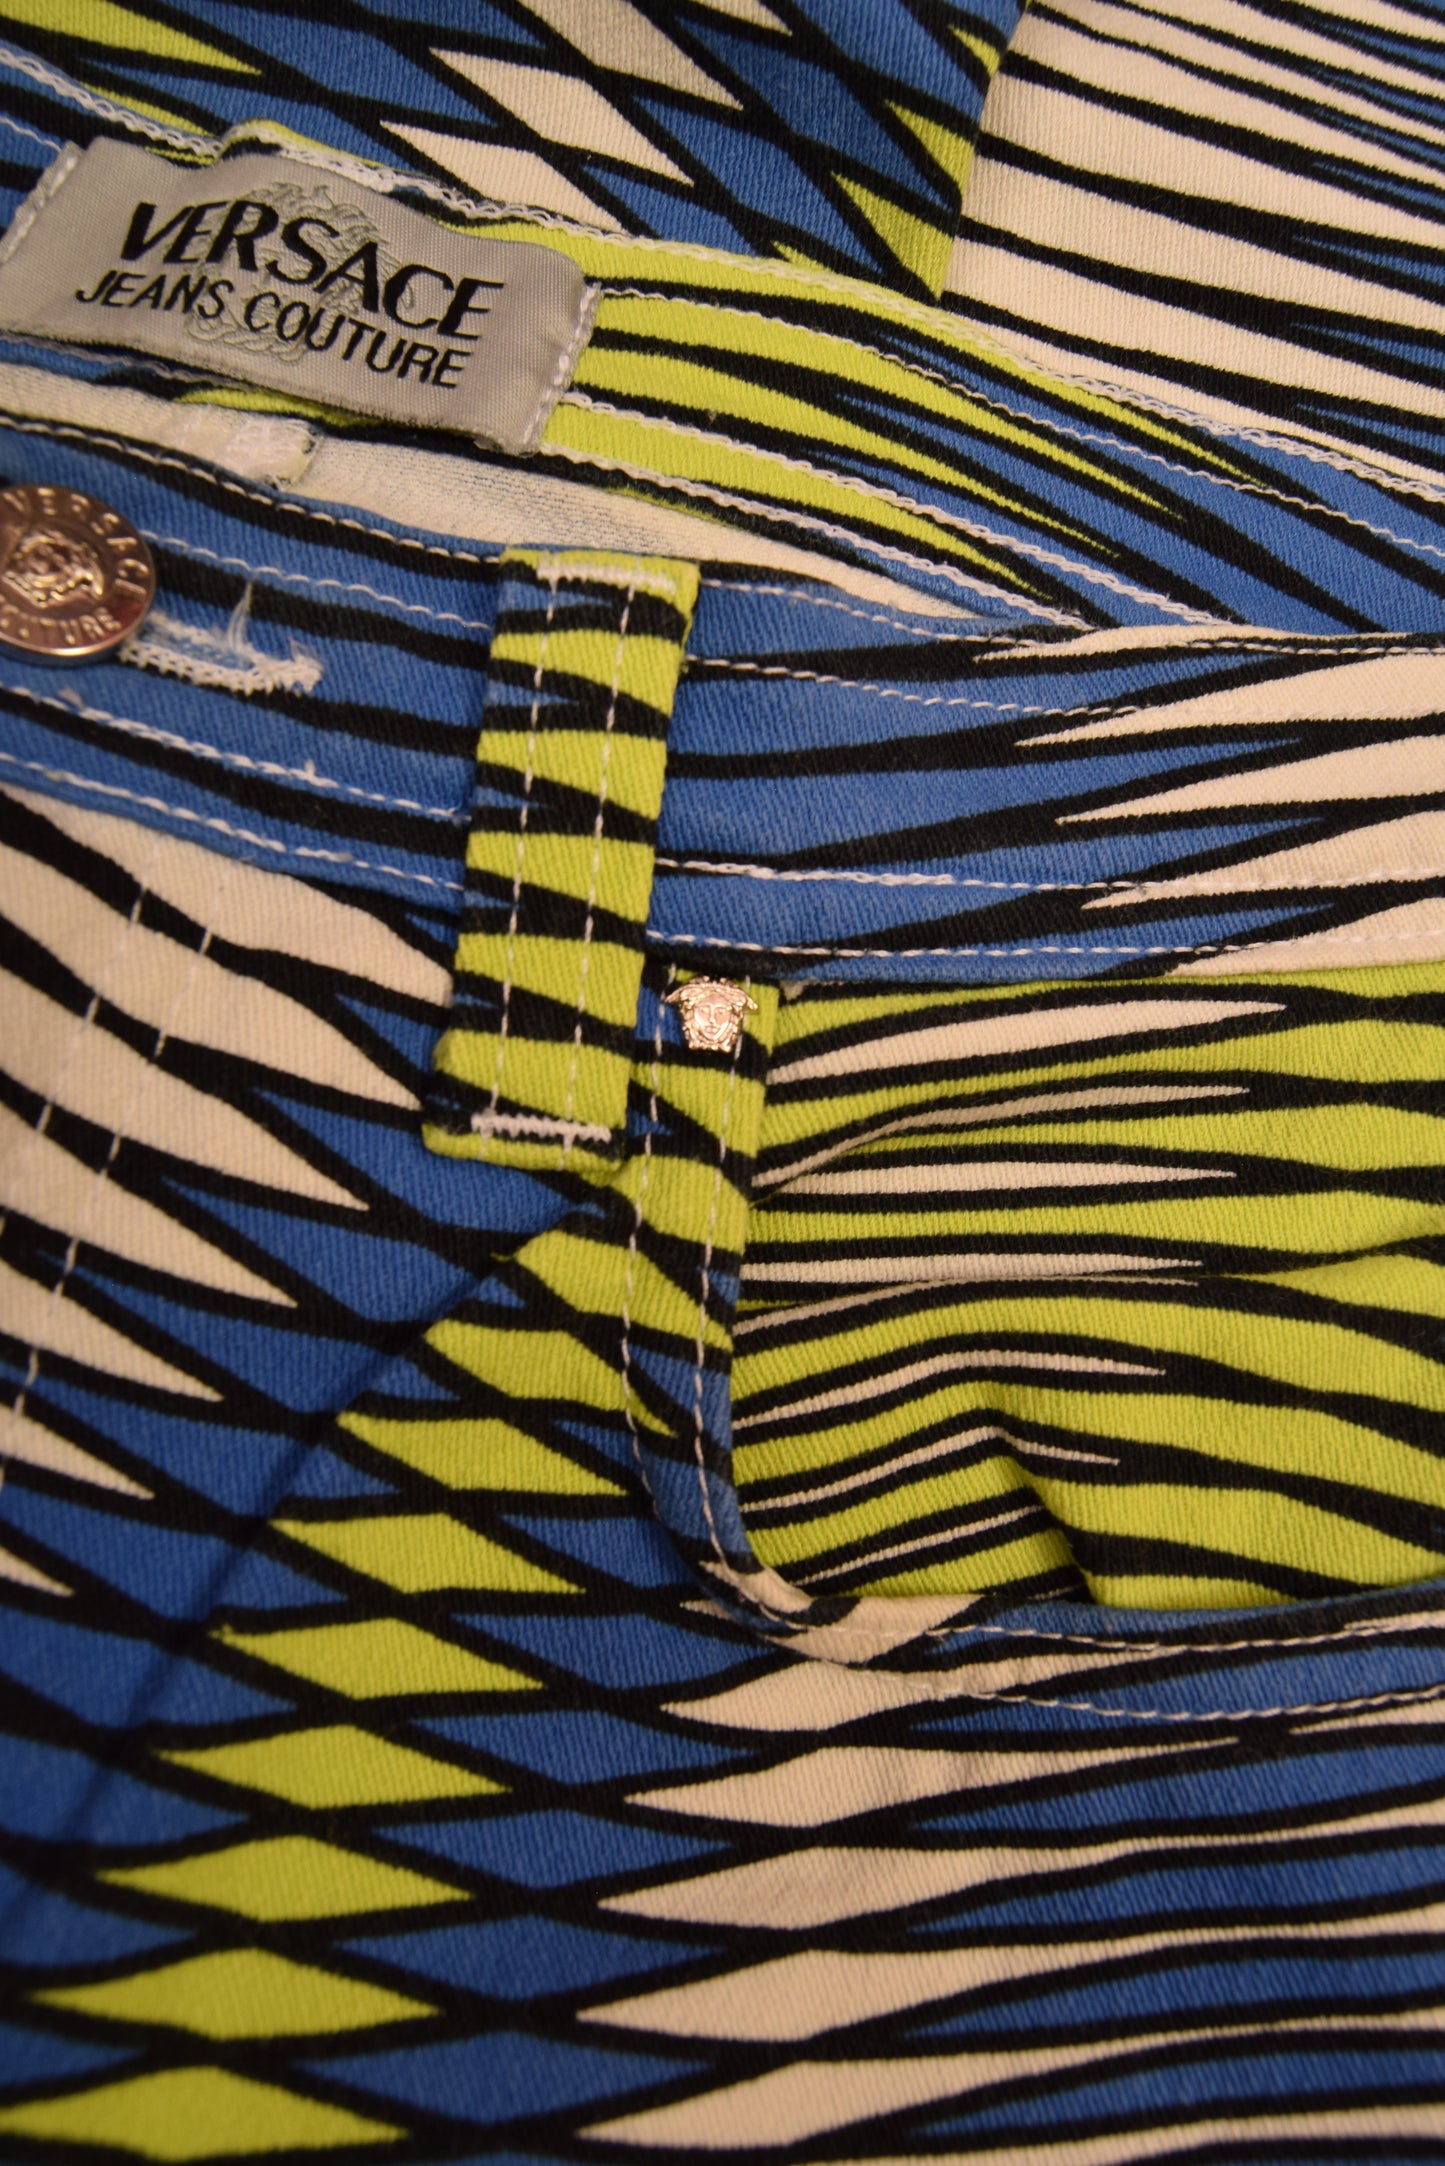 90's Versace Jeans Couture Op Art Psyhadelic Geometric Stretch Made in Italy High Waist Ittierre